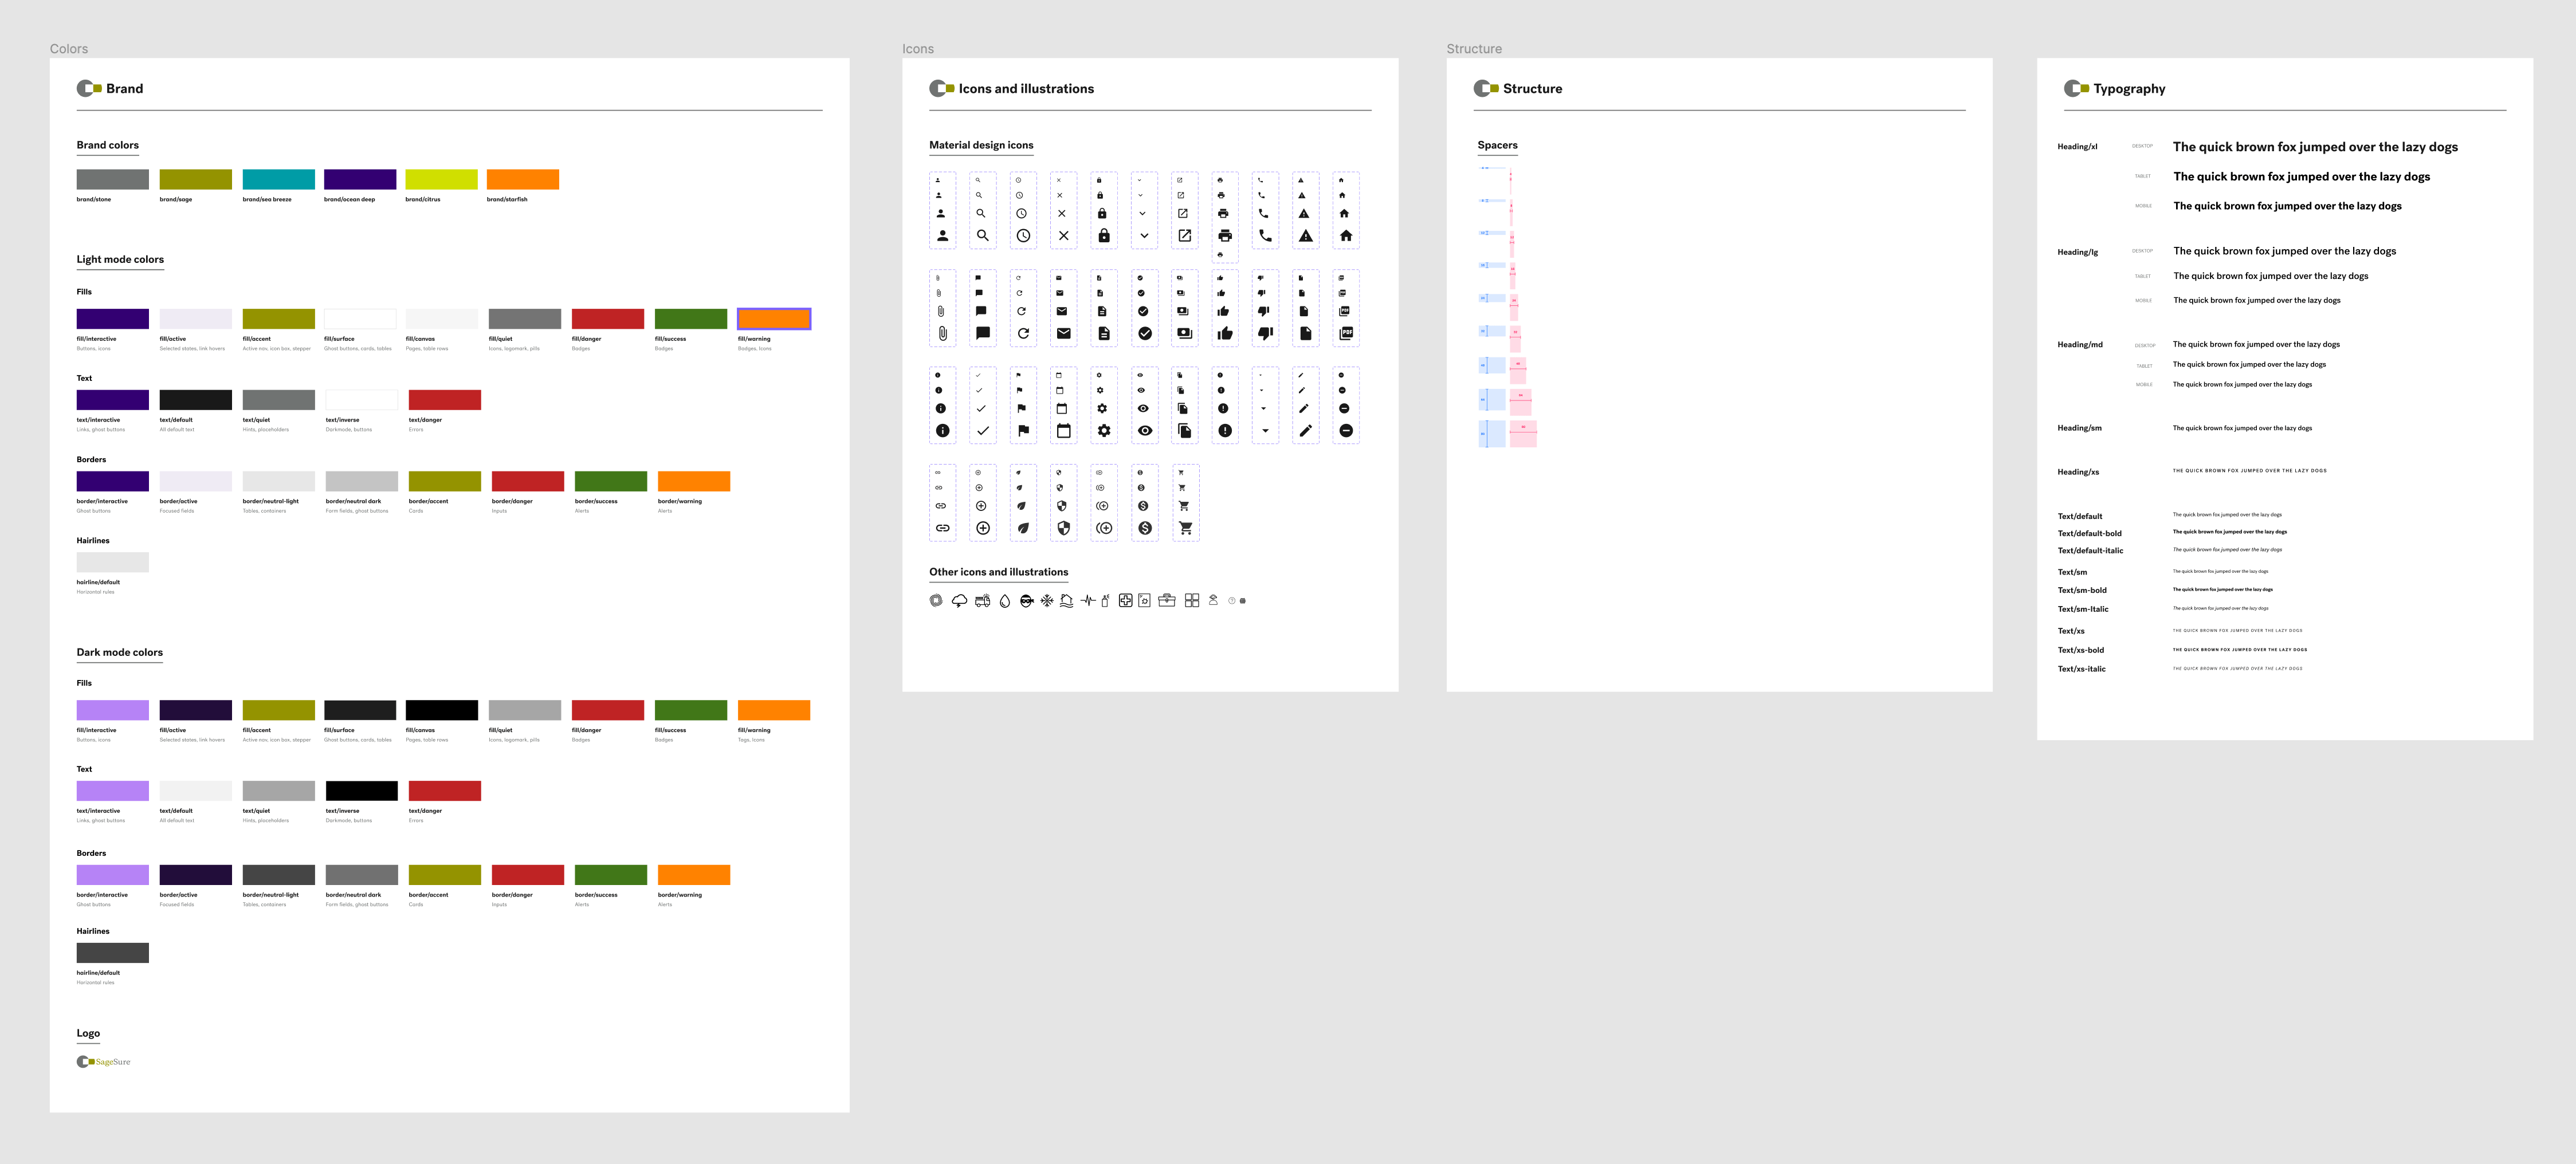 Screenshot of design system components in Figma, including colors, icons, spacing, and typography.